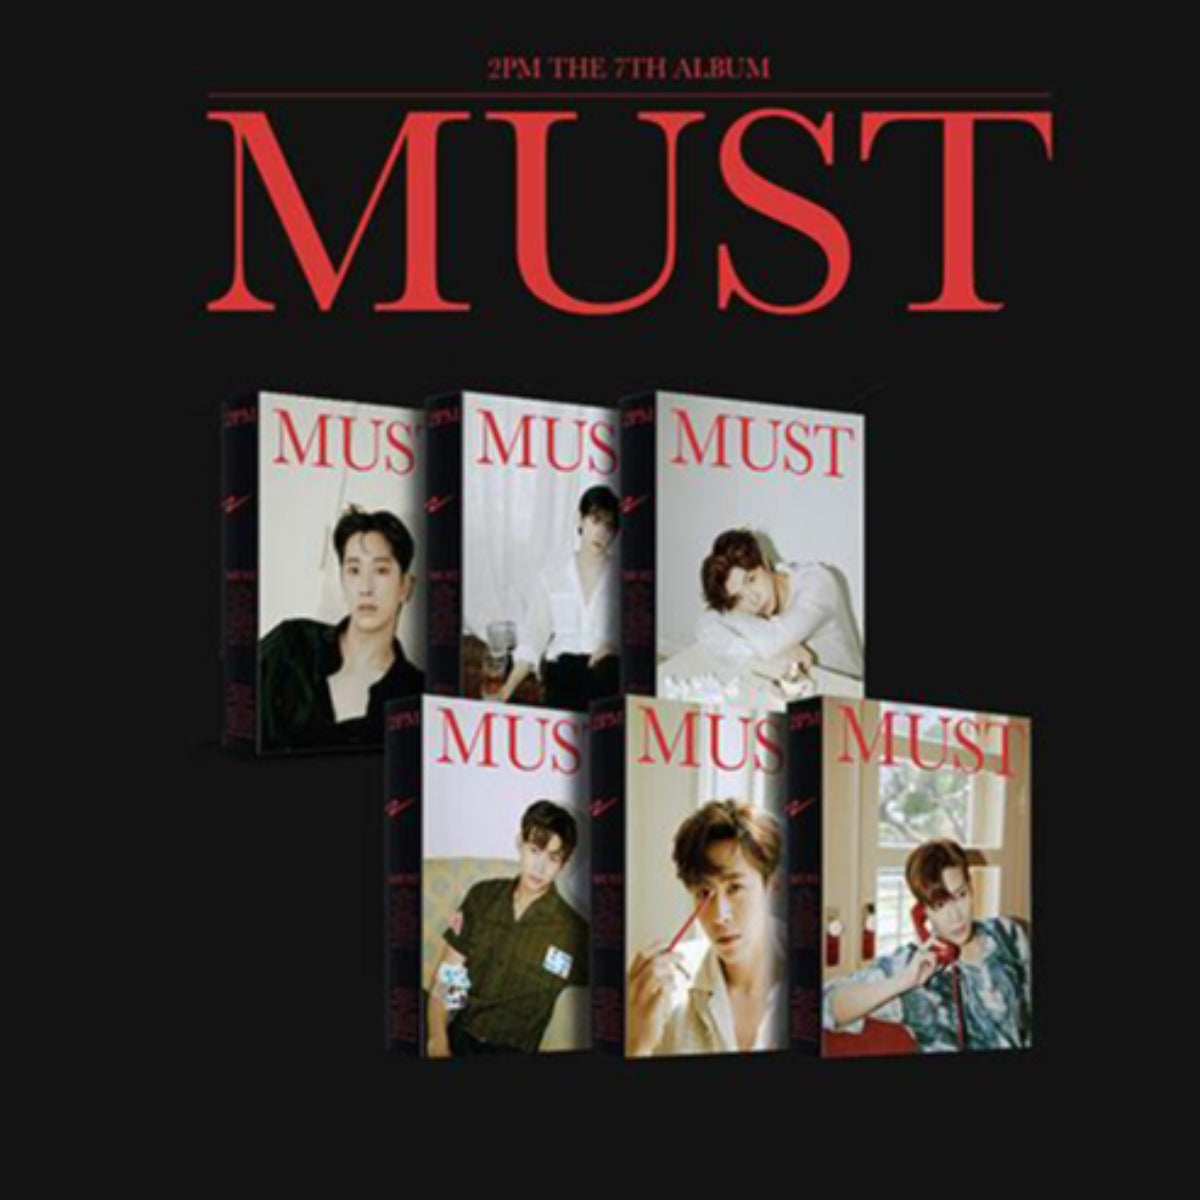 2PM Vol. 7 - MUST (Limited Edition)